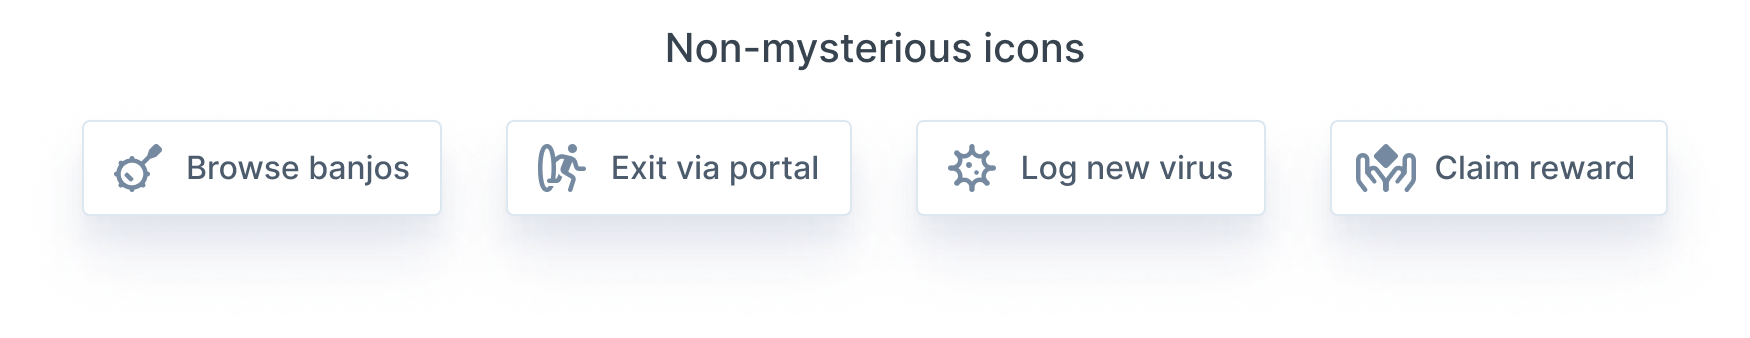 A row of uncommon icons with labels.